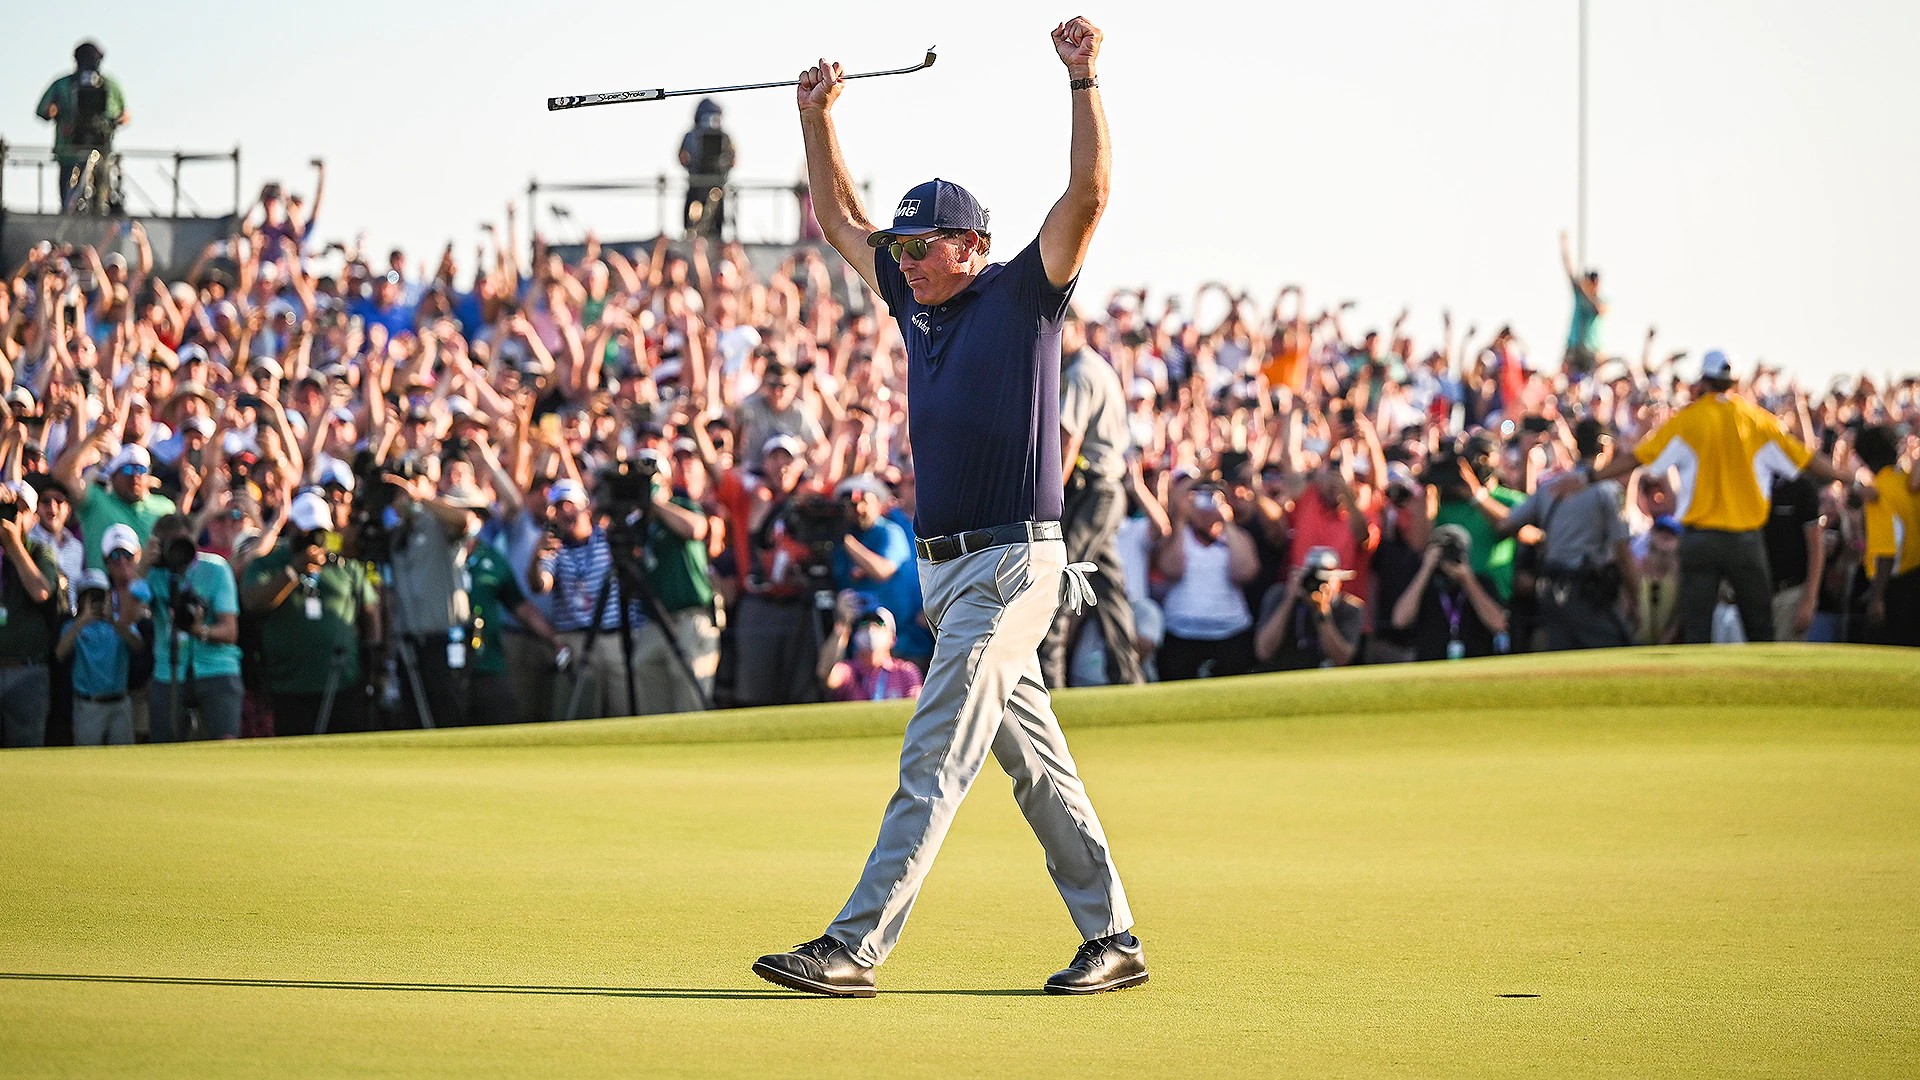 Cut Line: Celebrating the PGA Tour super season filled with many major moments